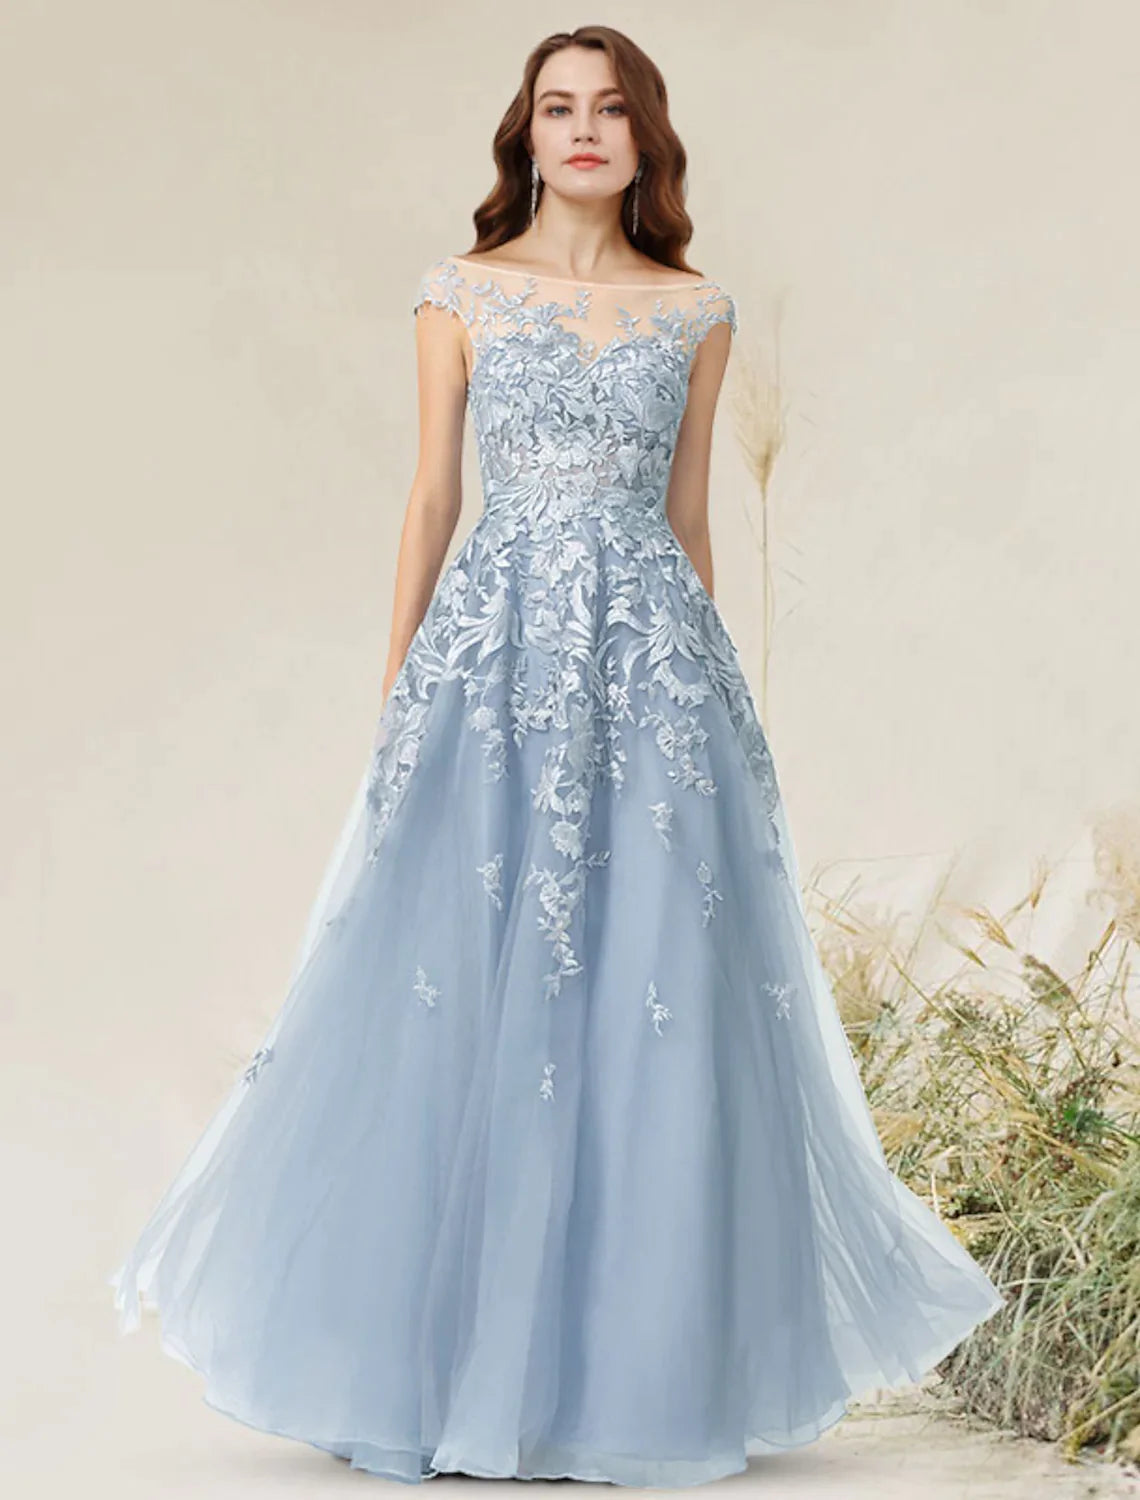 A-Line Empire Elegant Party Wear Formal Evening Dress Jewel Neck Sleeveless Floor Length Lace with Appliques